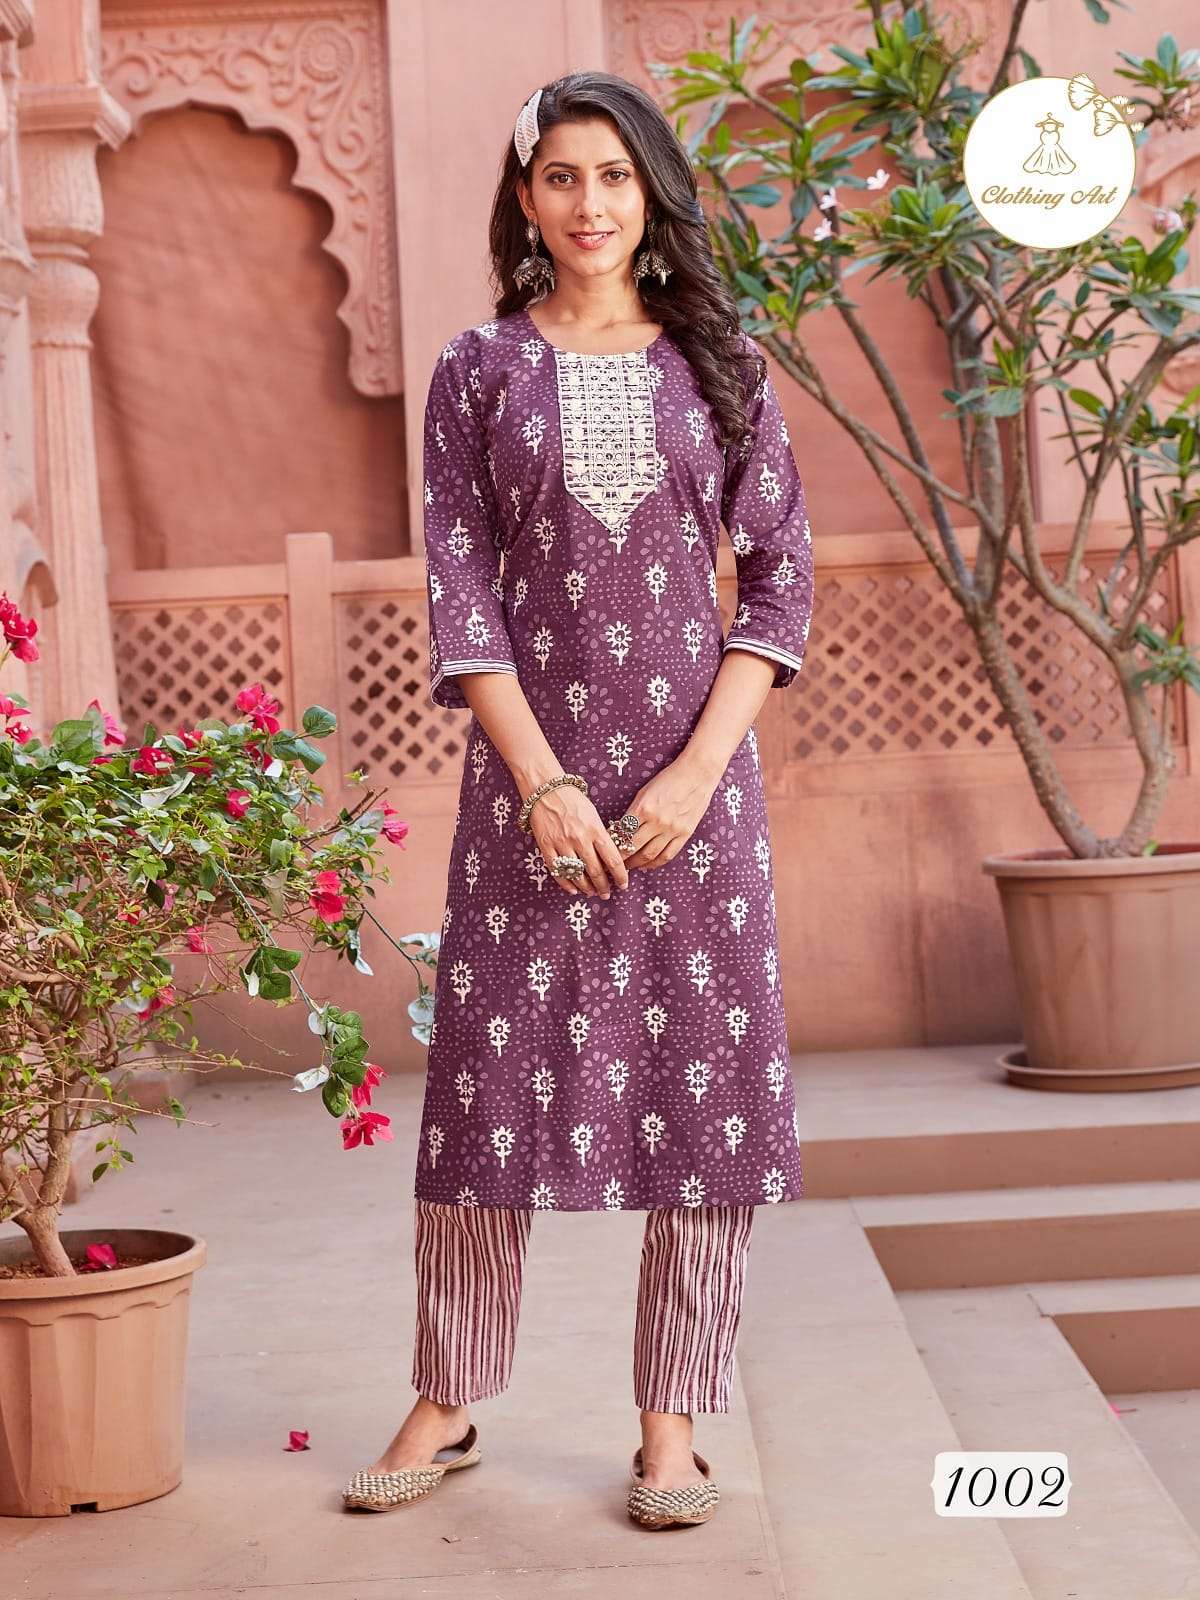 Cotton Glory Vol-1 By Clothing Art 1001 To 1005 Series Designer Stylish Fancy Colorful Beautiful Party Wear & Ethnic Wear Collection Pure Cotton Kurtis With Bottom At Wholesale Price